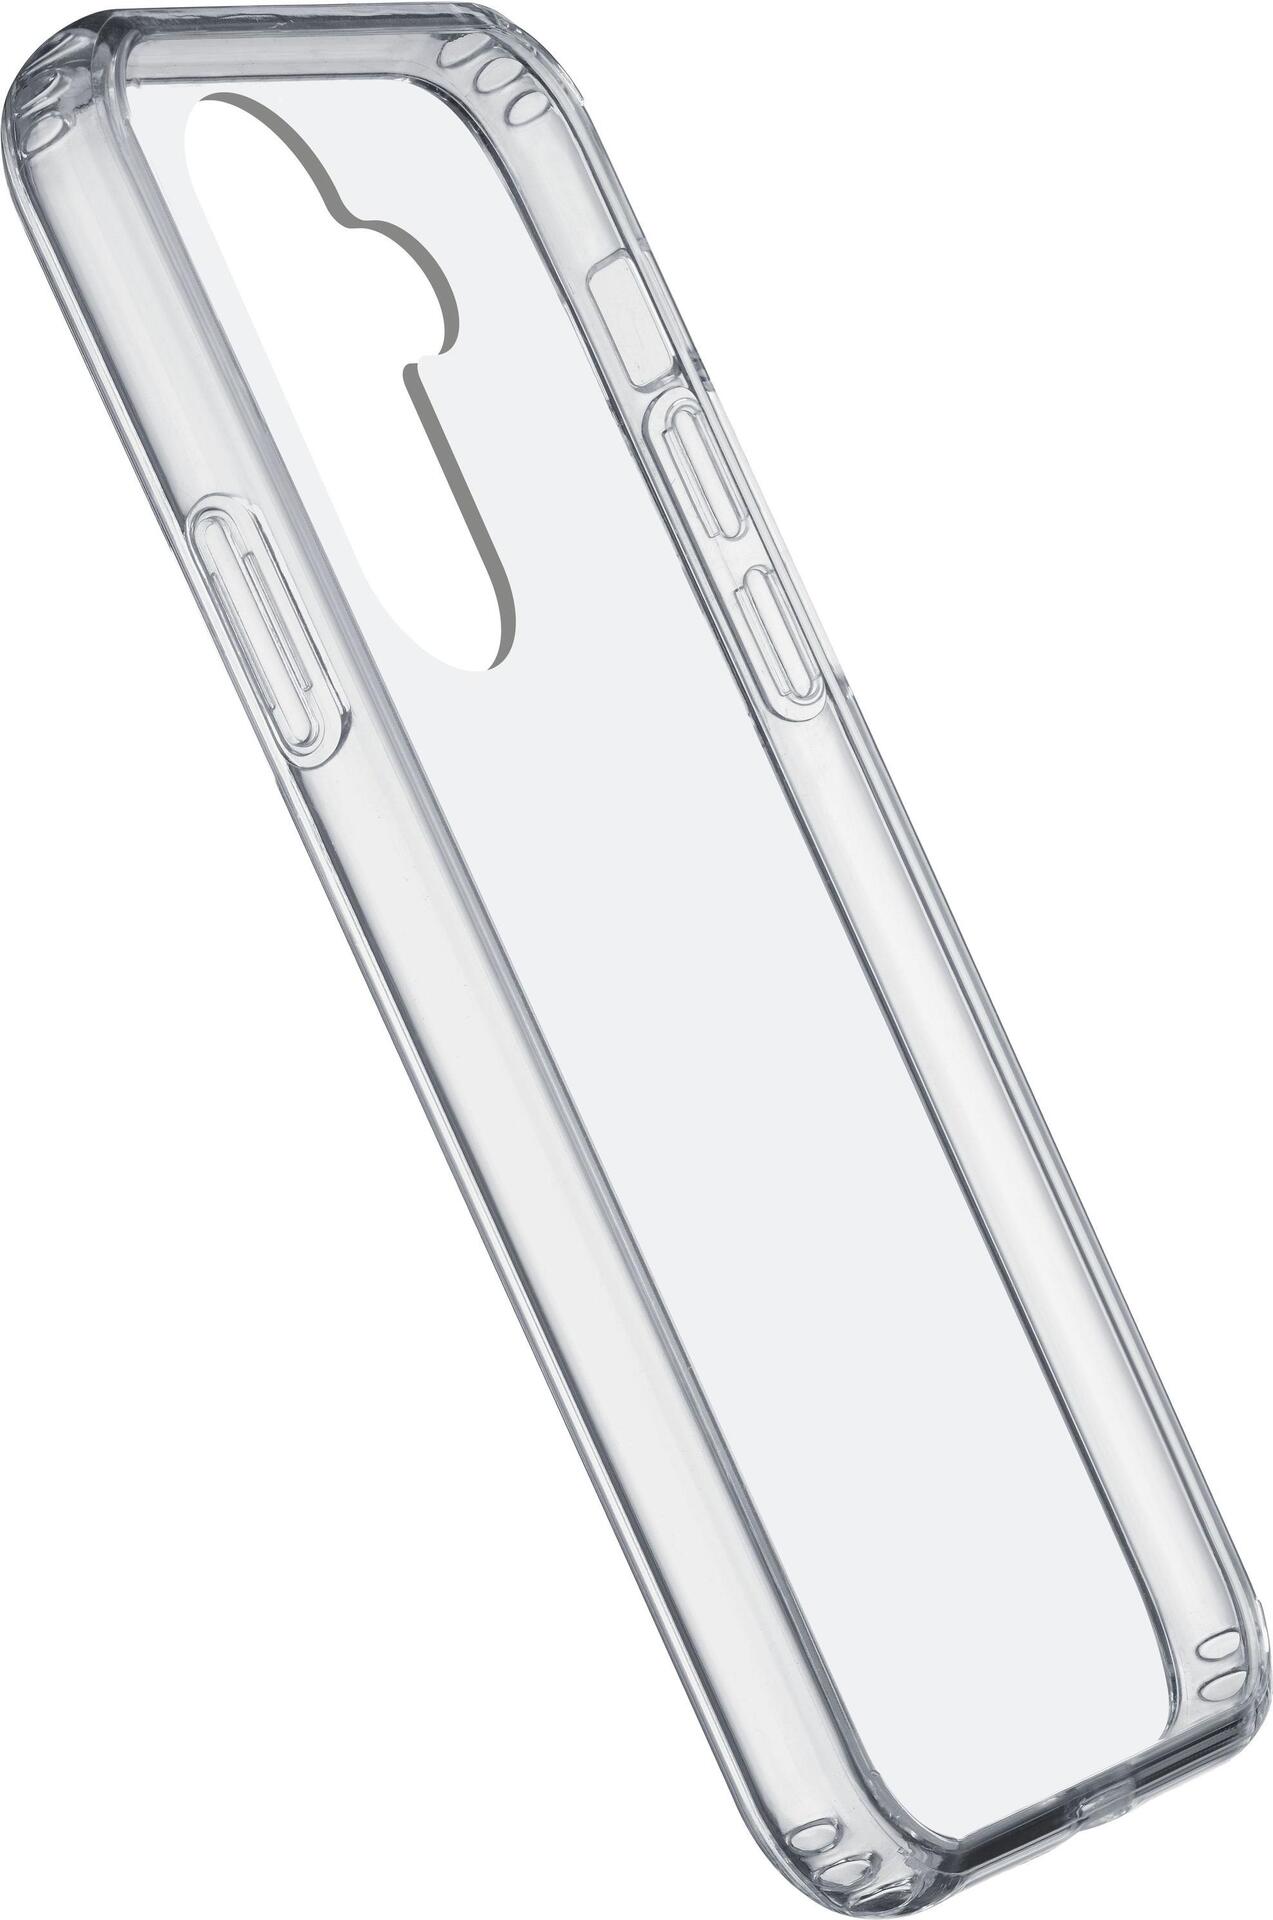 Cellularline Clear Strong – Galaxy A34 – Cover – Samsung – Galaxy A34 5G – 16,8 cm (6.6) – Transparent (CLEARDUOGALA34T)